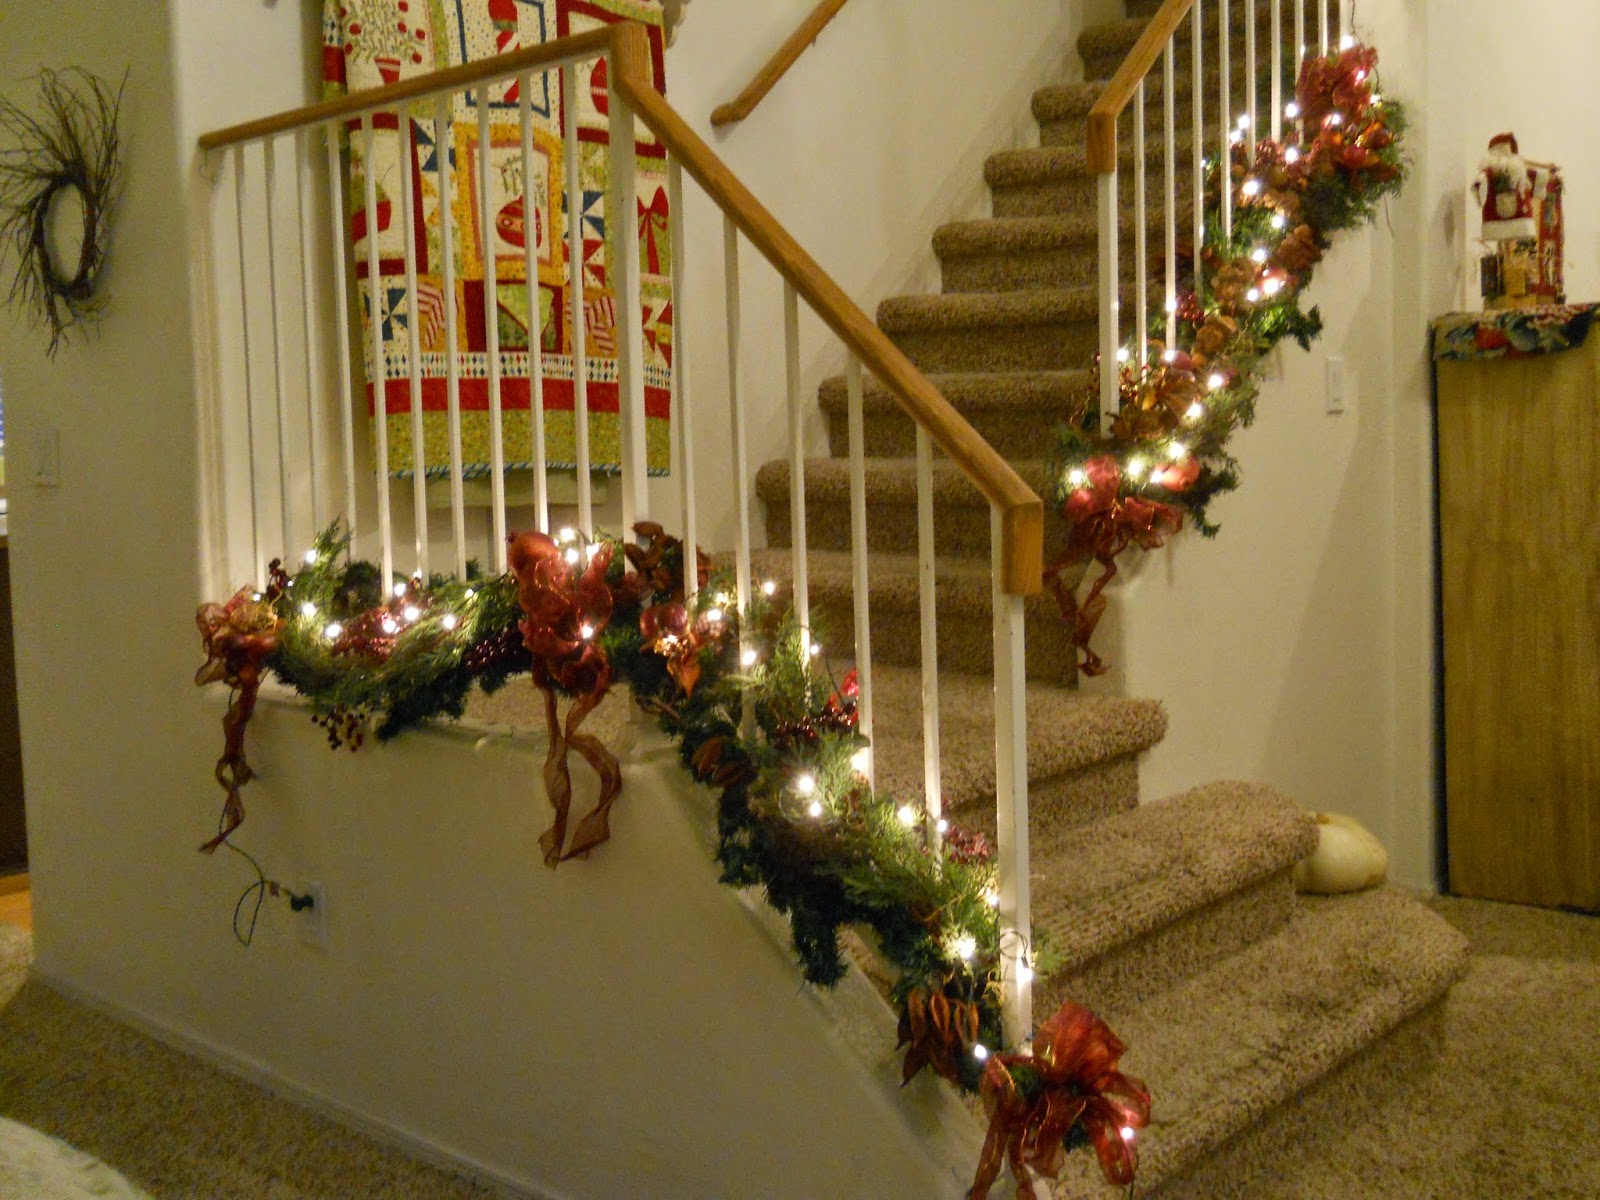 Polka Dot Quilter: Decorating Stairs at Christmas...Christmas quilts too...